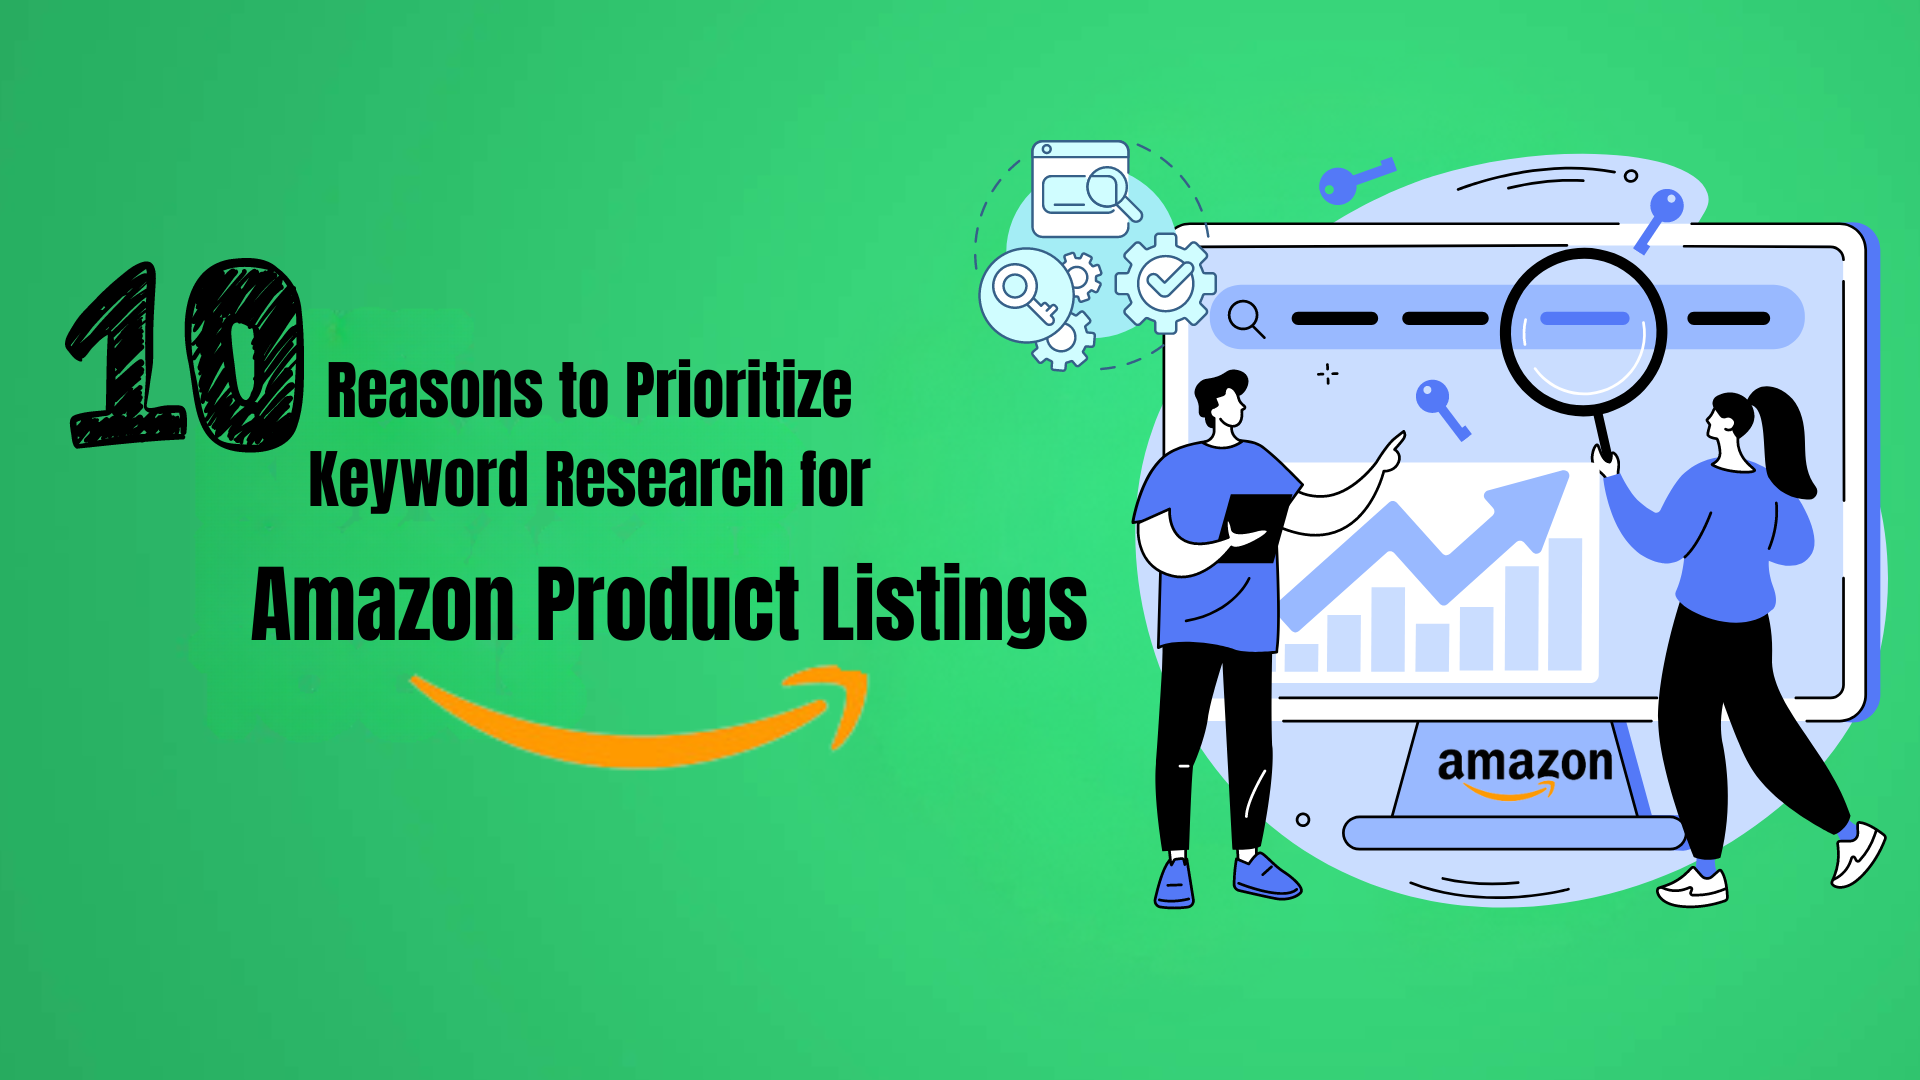 10 Reasons to Prioritize Keyword Research for Amazon Product Listings